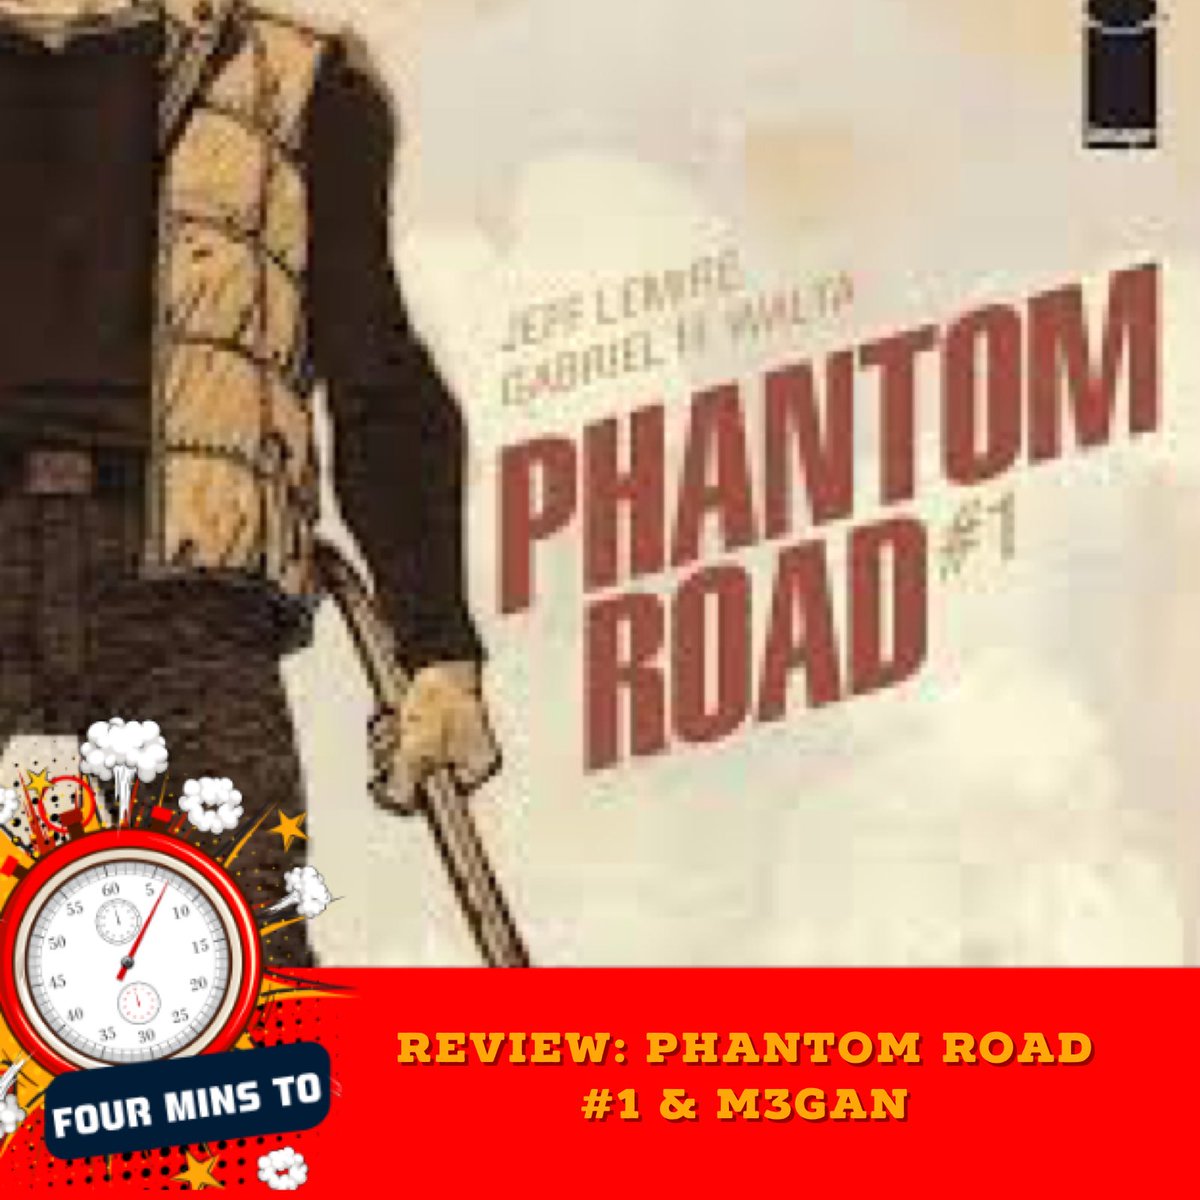 New episode alert! Did you miss the amazing first issue of the comic #PhatomRoad by @JeffLemire and @ghwalta? Or the horror movie #M3GAN? Got four mins? Got you covered! Check out my reviews for both! 

Spotify: bit.ly/41XAhMU 
Apple: apple.co/3Zy7a1a